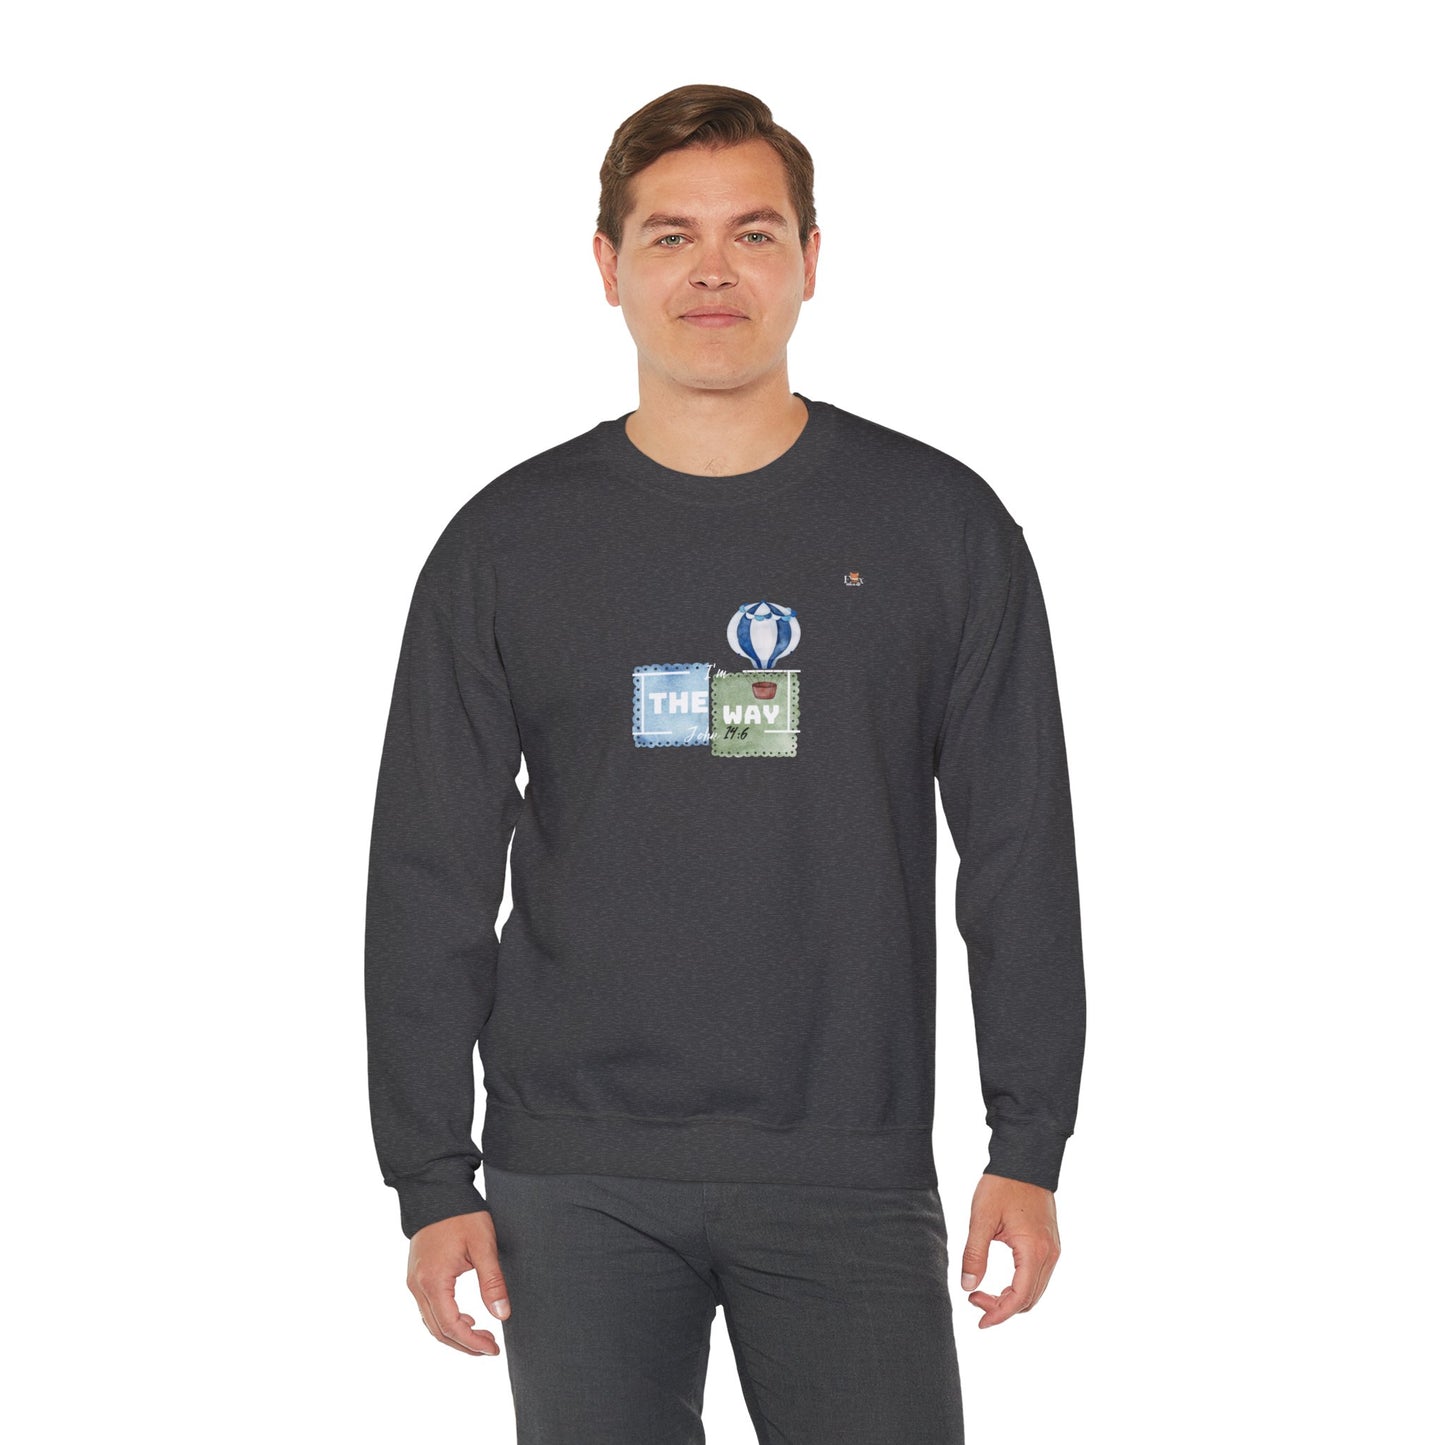 I Am The Way whit with Hot Air Balloons- Unisex Crewneck Sweatshirt